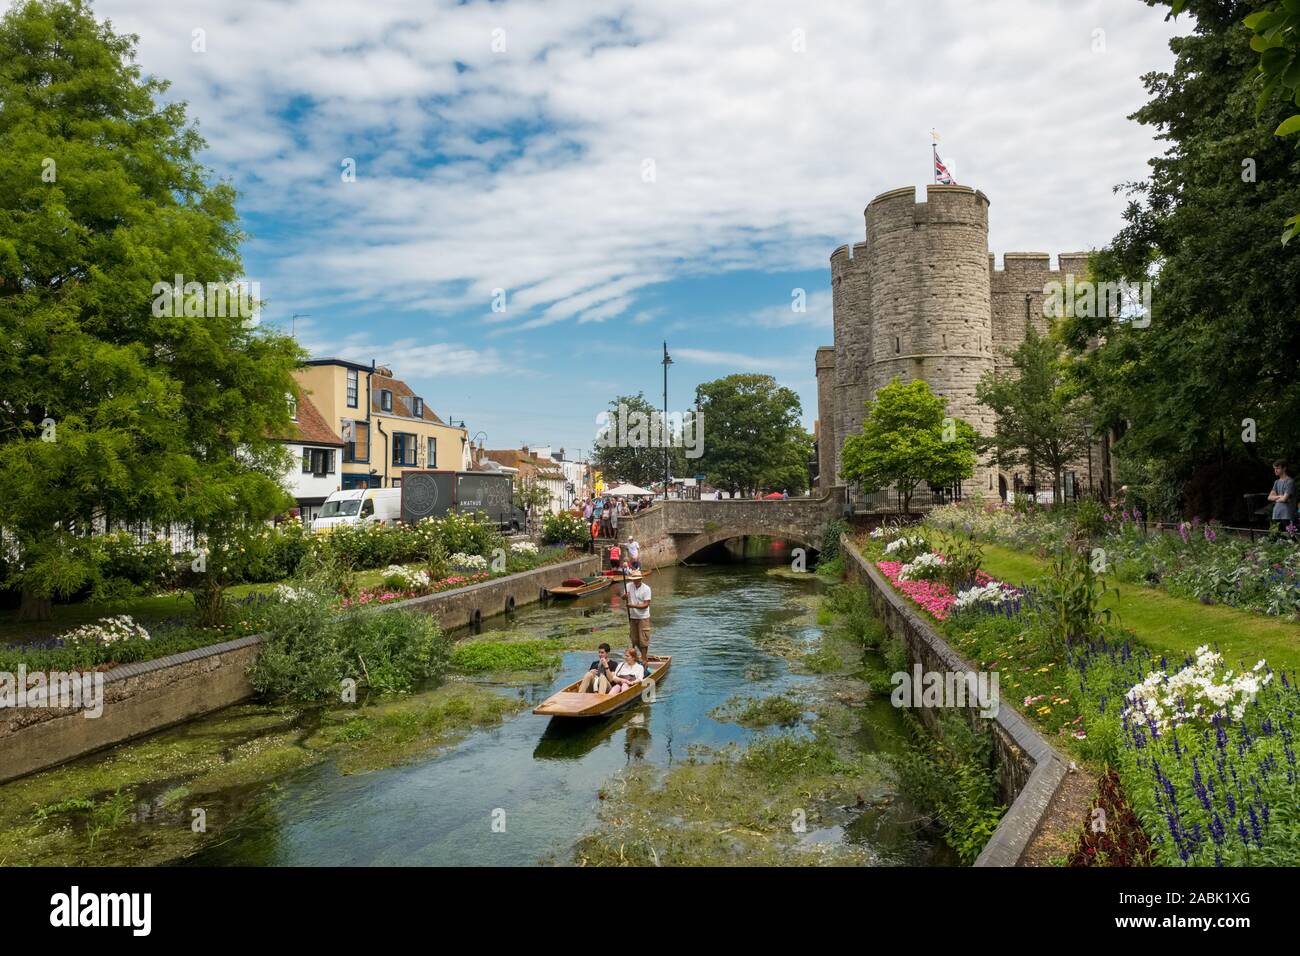 CANTERBURY, UK, - JULY, 11, 2019: Tourists enjoy a punt ride on the River Stour as it flows through Westgate Gardens, Canterbury, Kent, in the UK Stock Photo